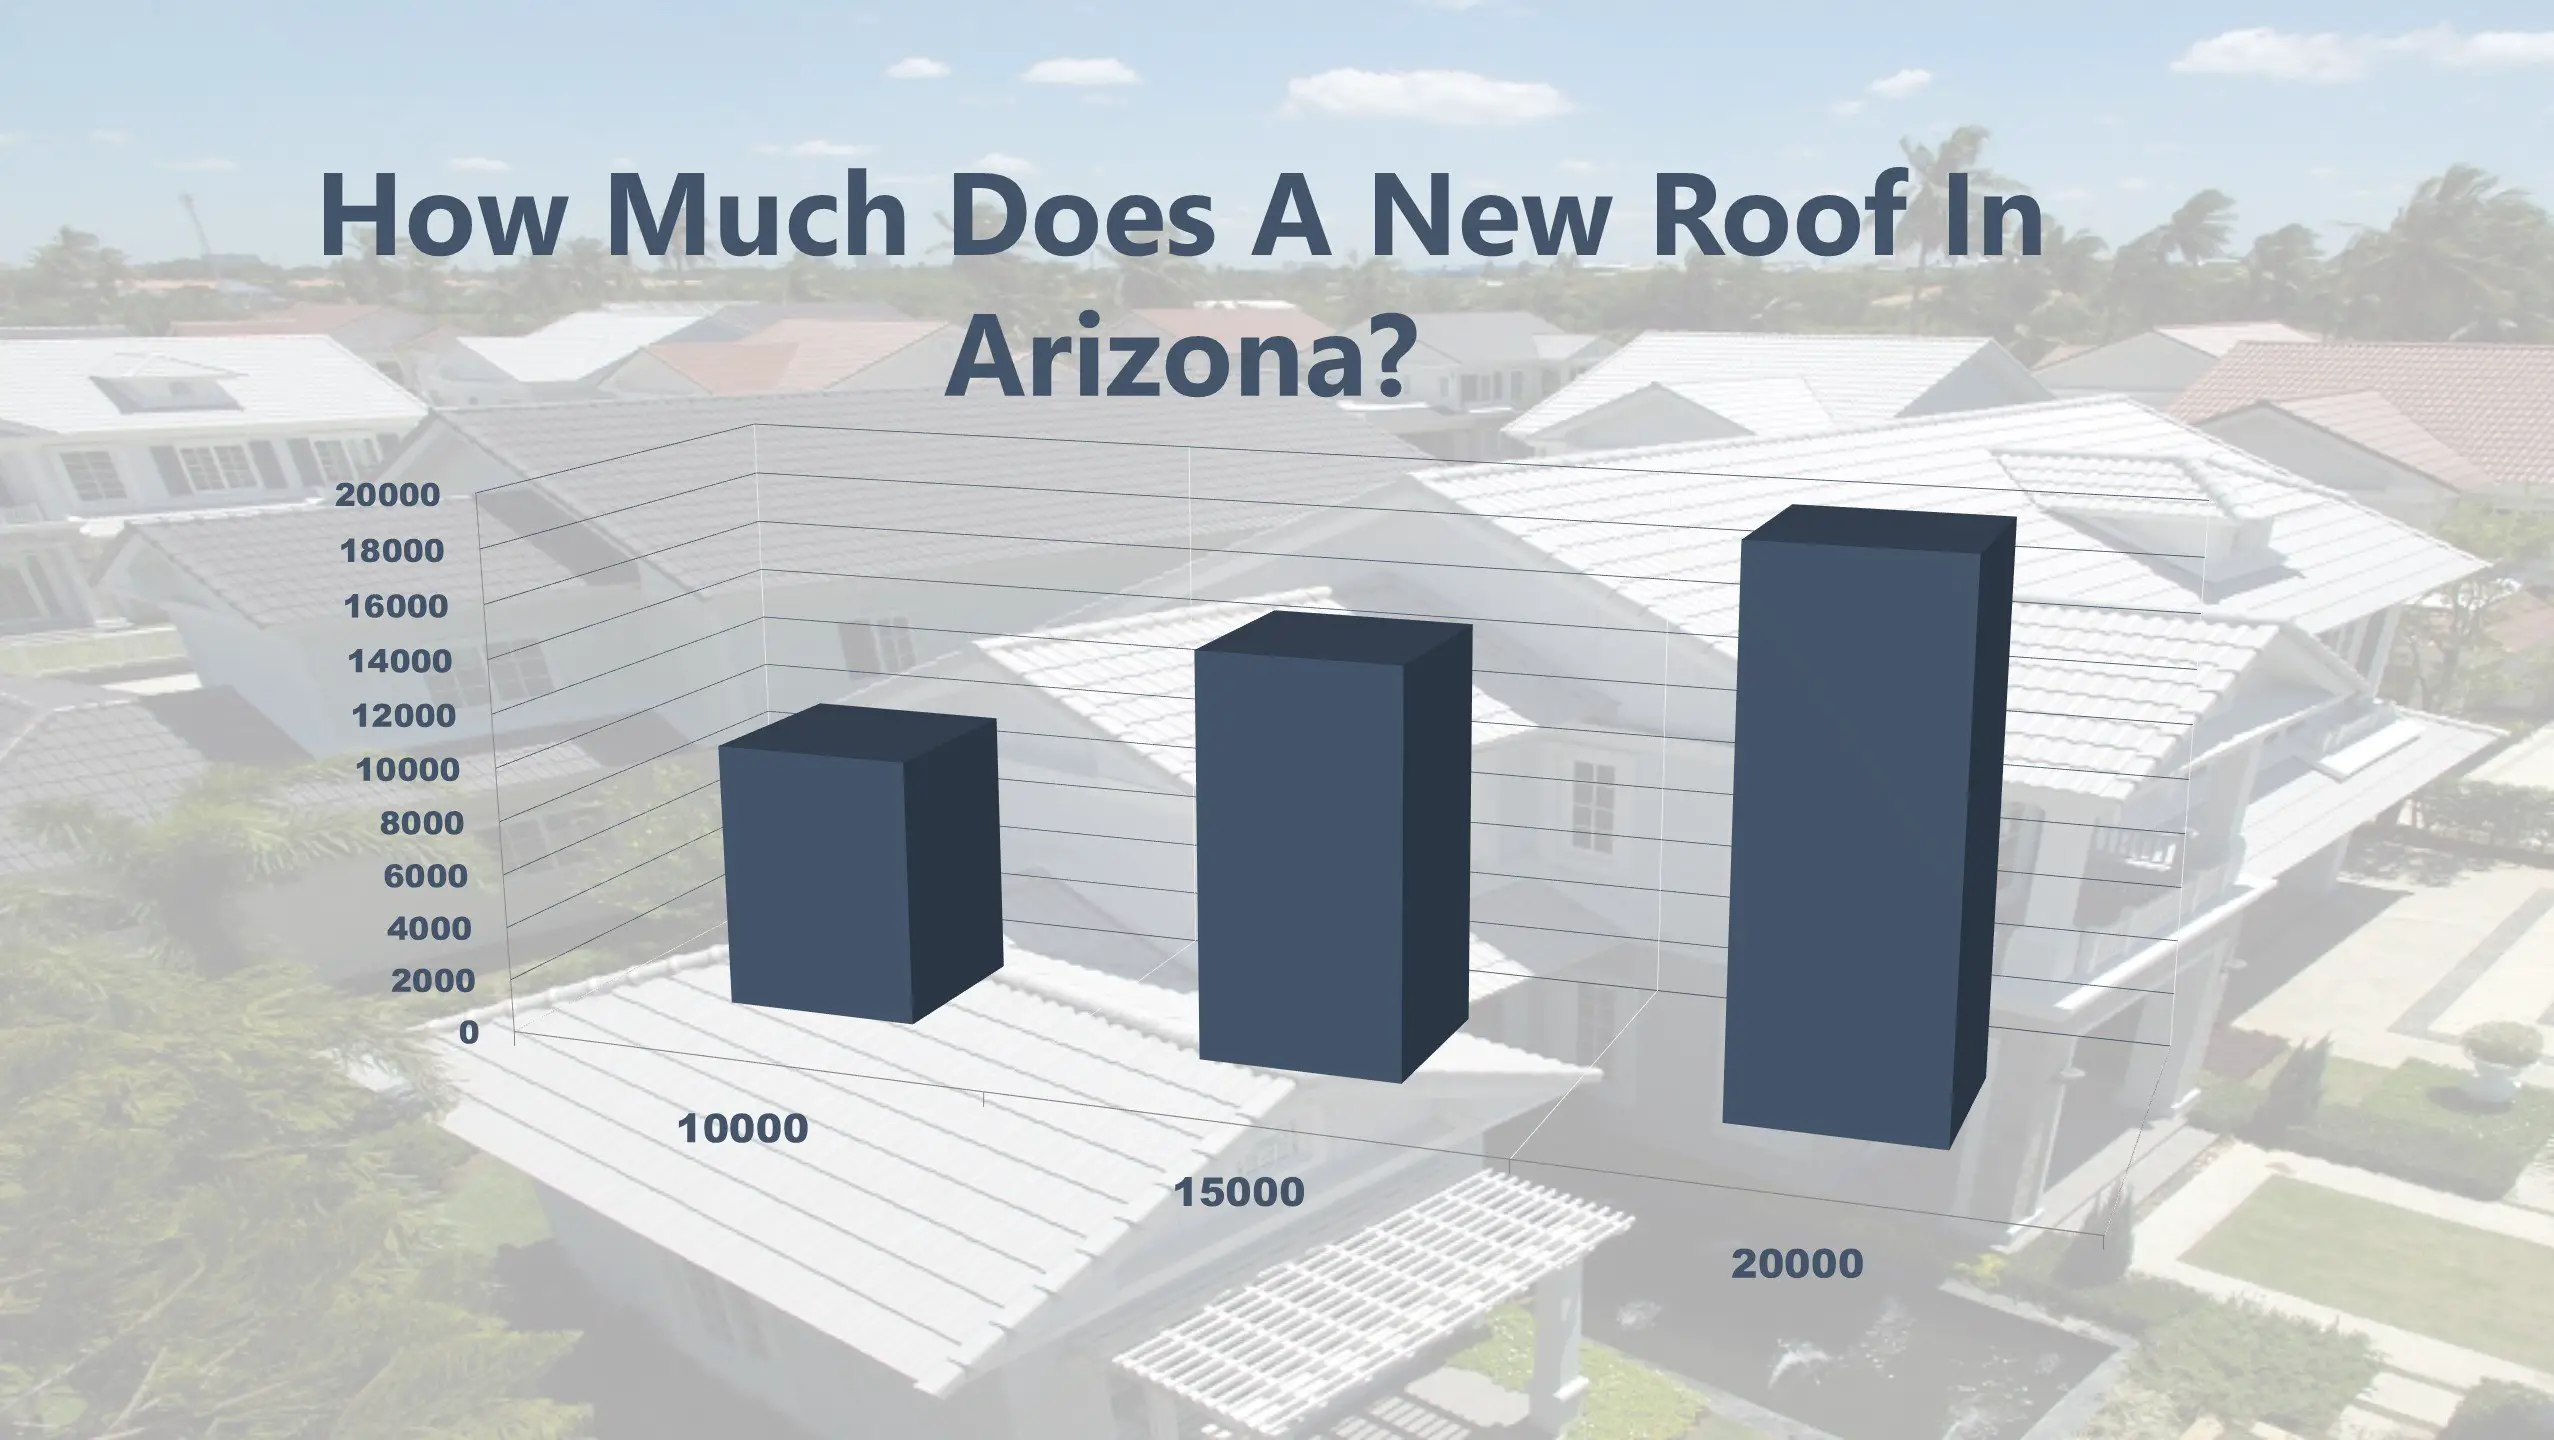 How Much Does A New Roof Cost In Arizona?